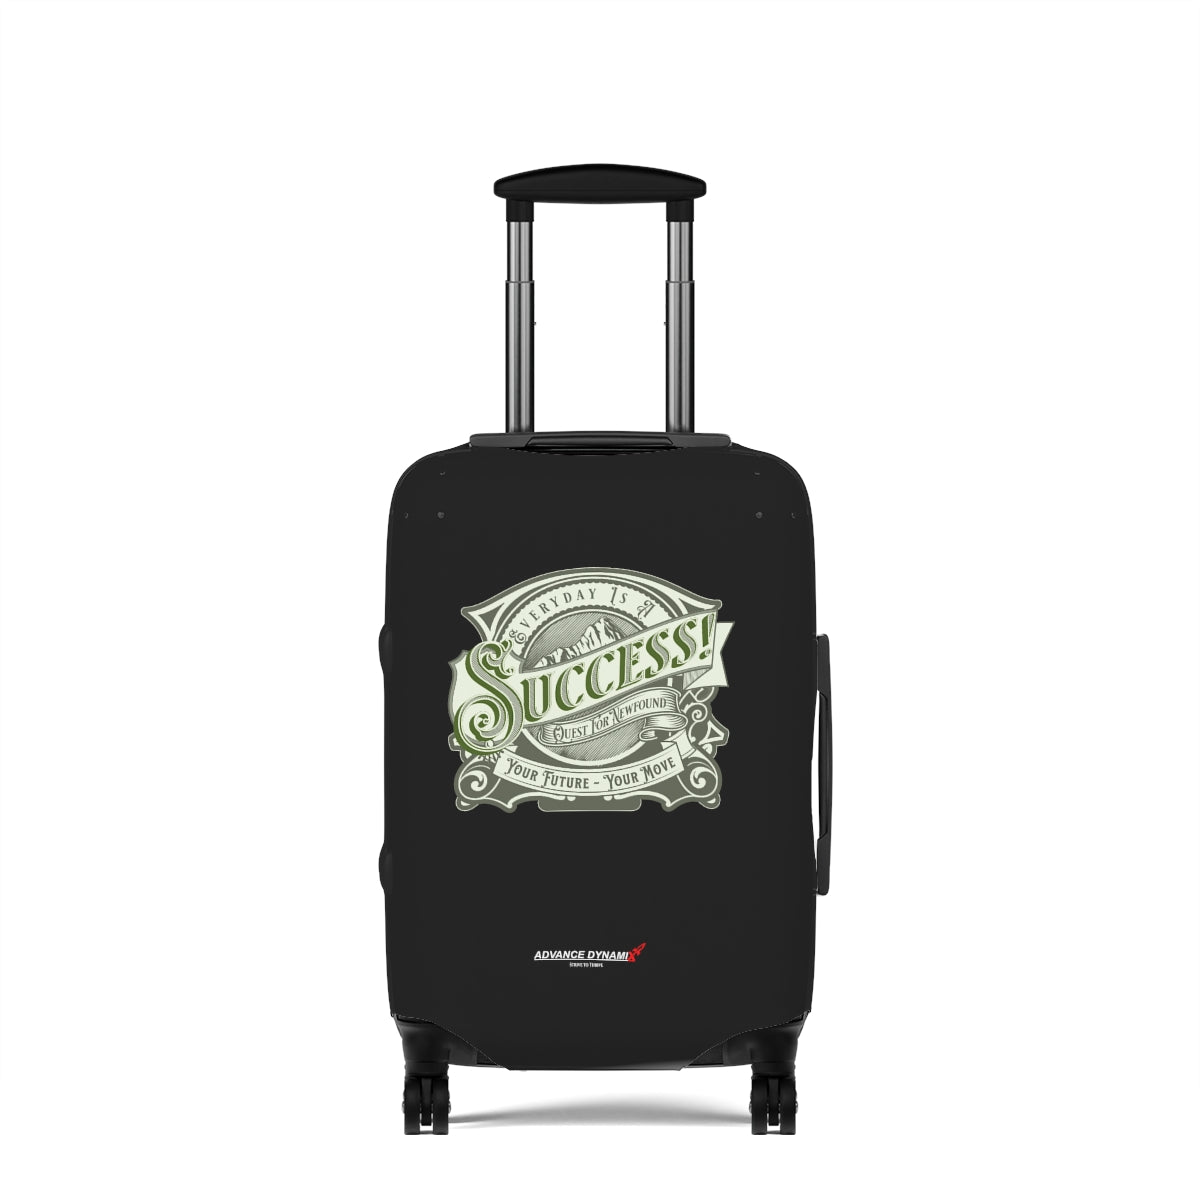 Every day is a quest for newfound success - Your future, your move - Luggage Covers Infused with Advance Dynamix Add-A-Tude - Tell the world!